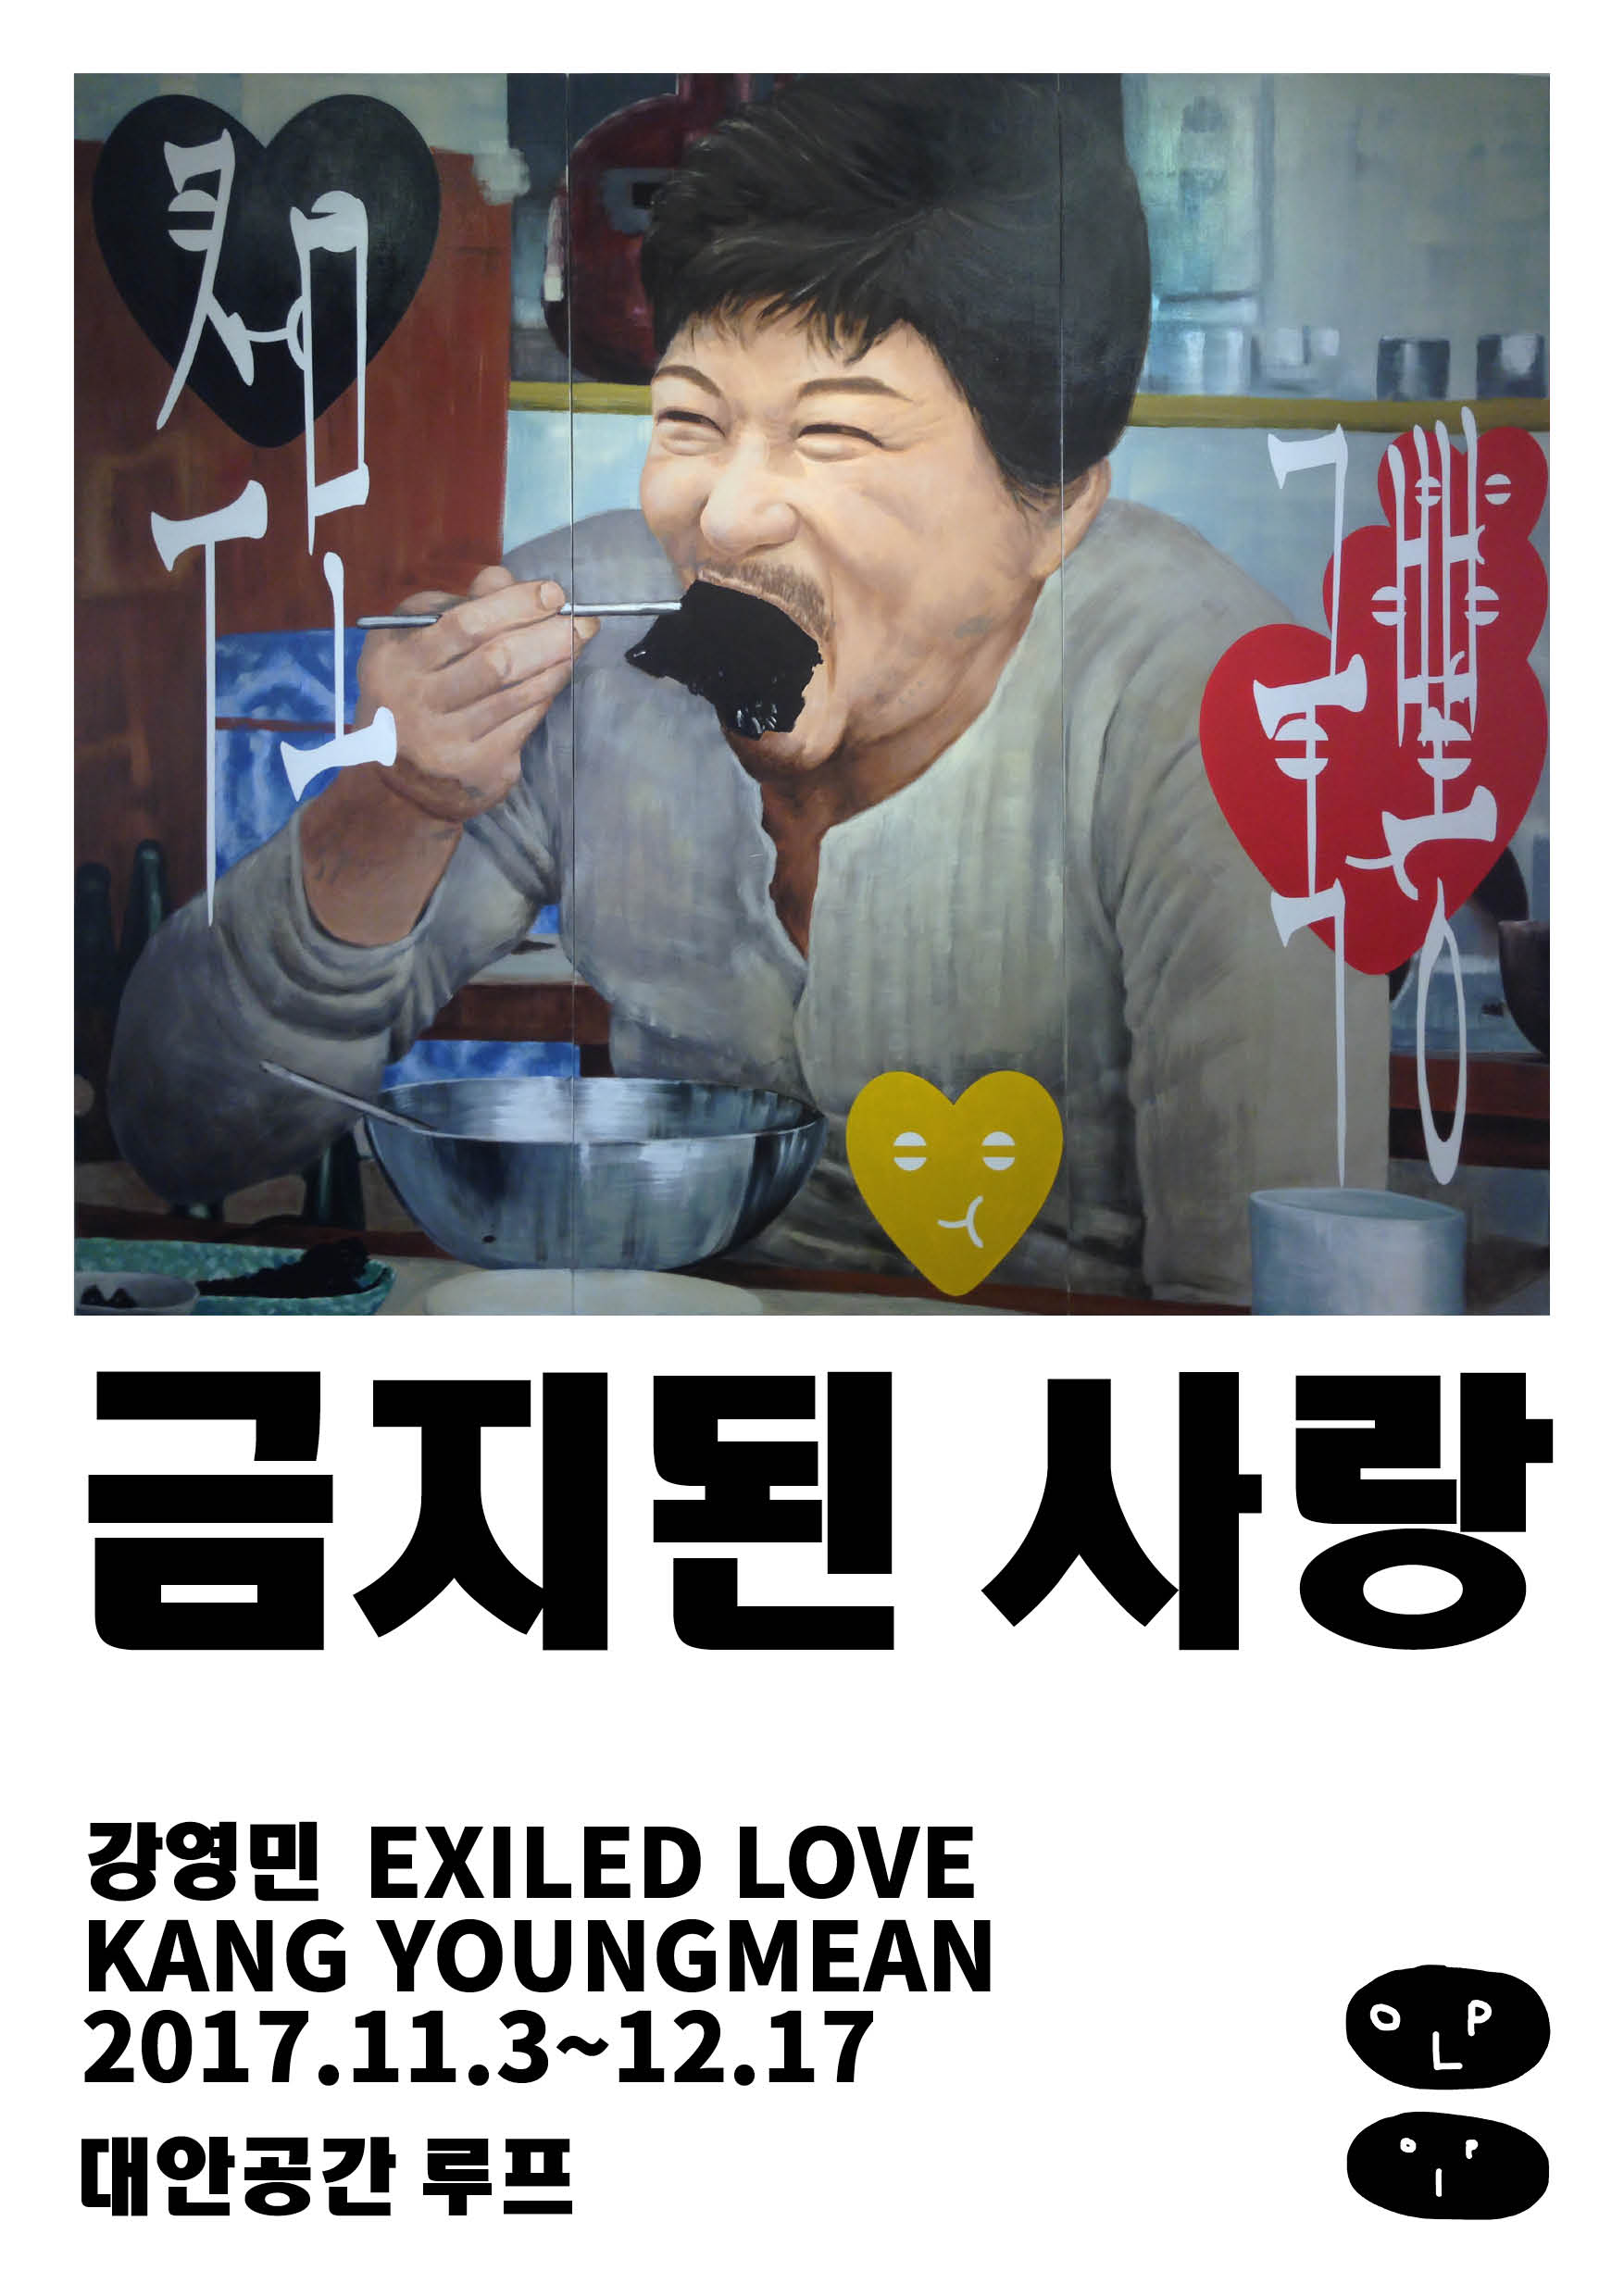 Young Mean Kang Solo Exhibition: Exiled Love